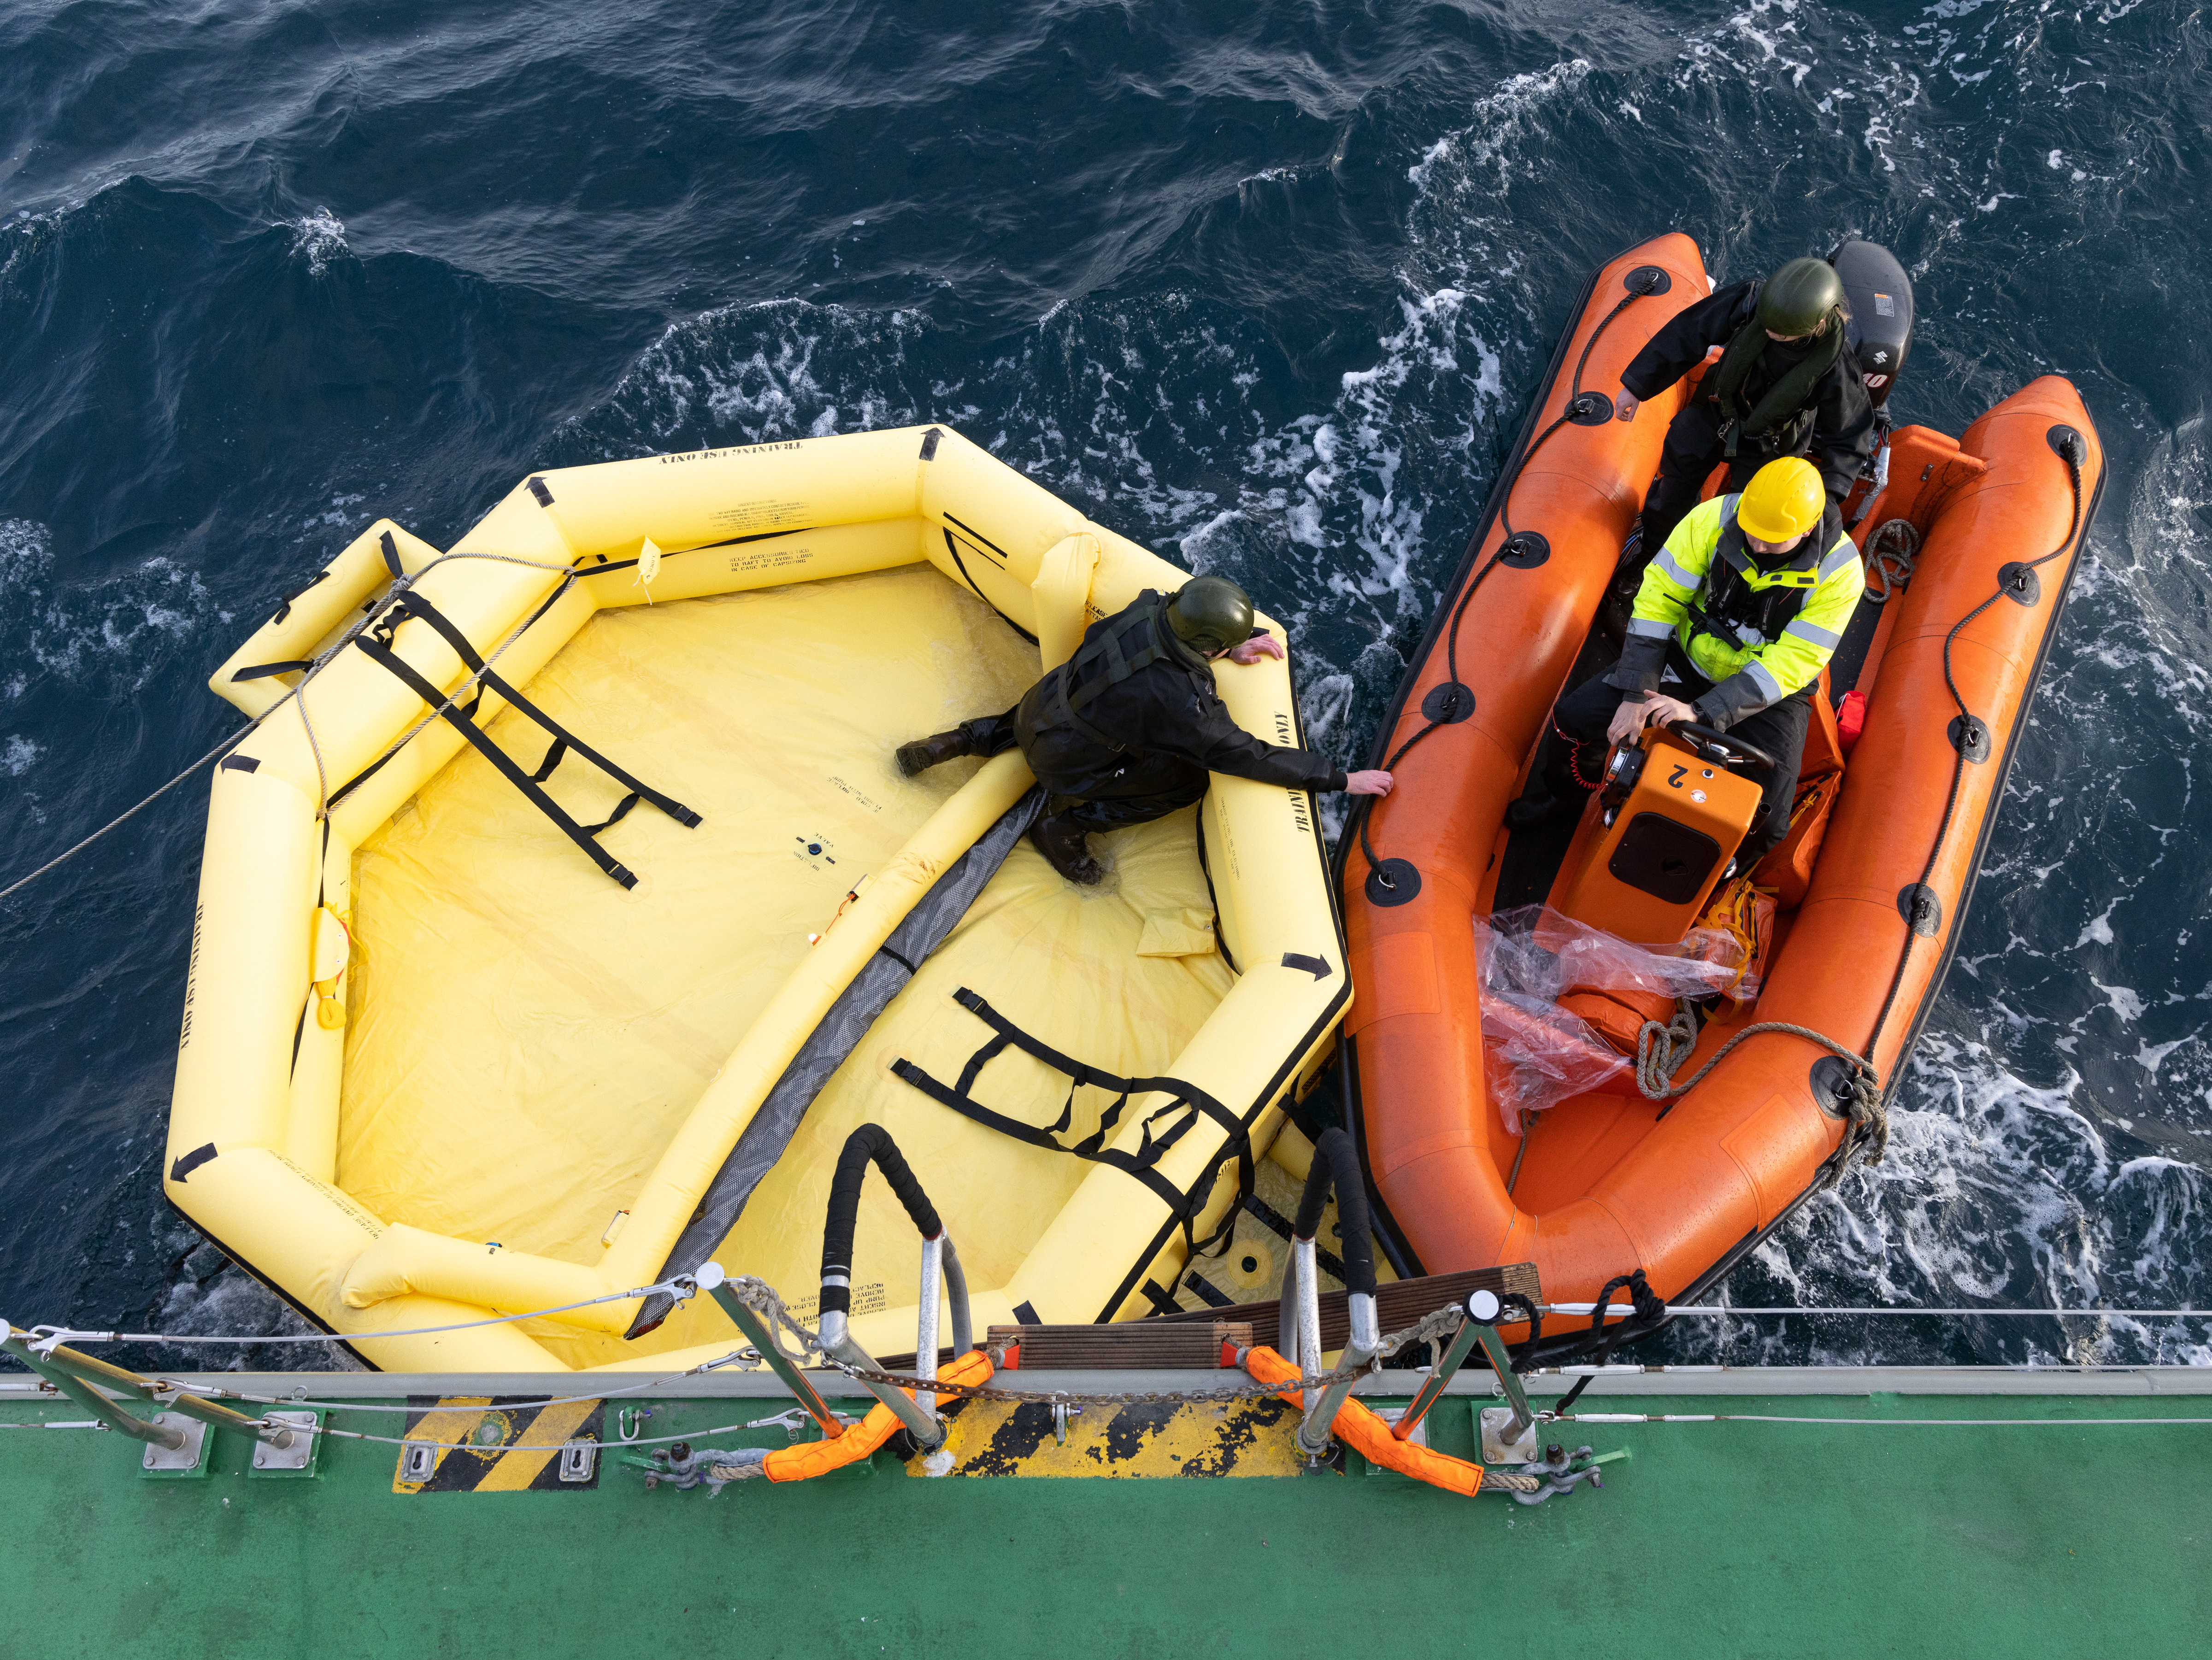 Image shows RAF Search and Rescue team and two lifeboats on the sea.